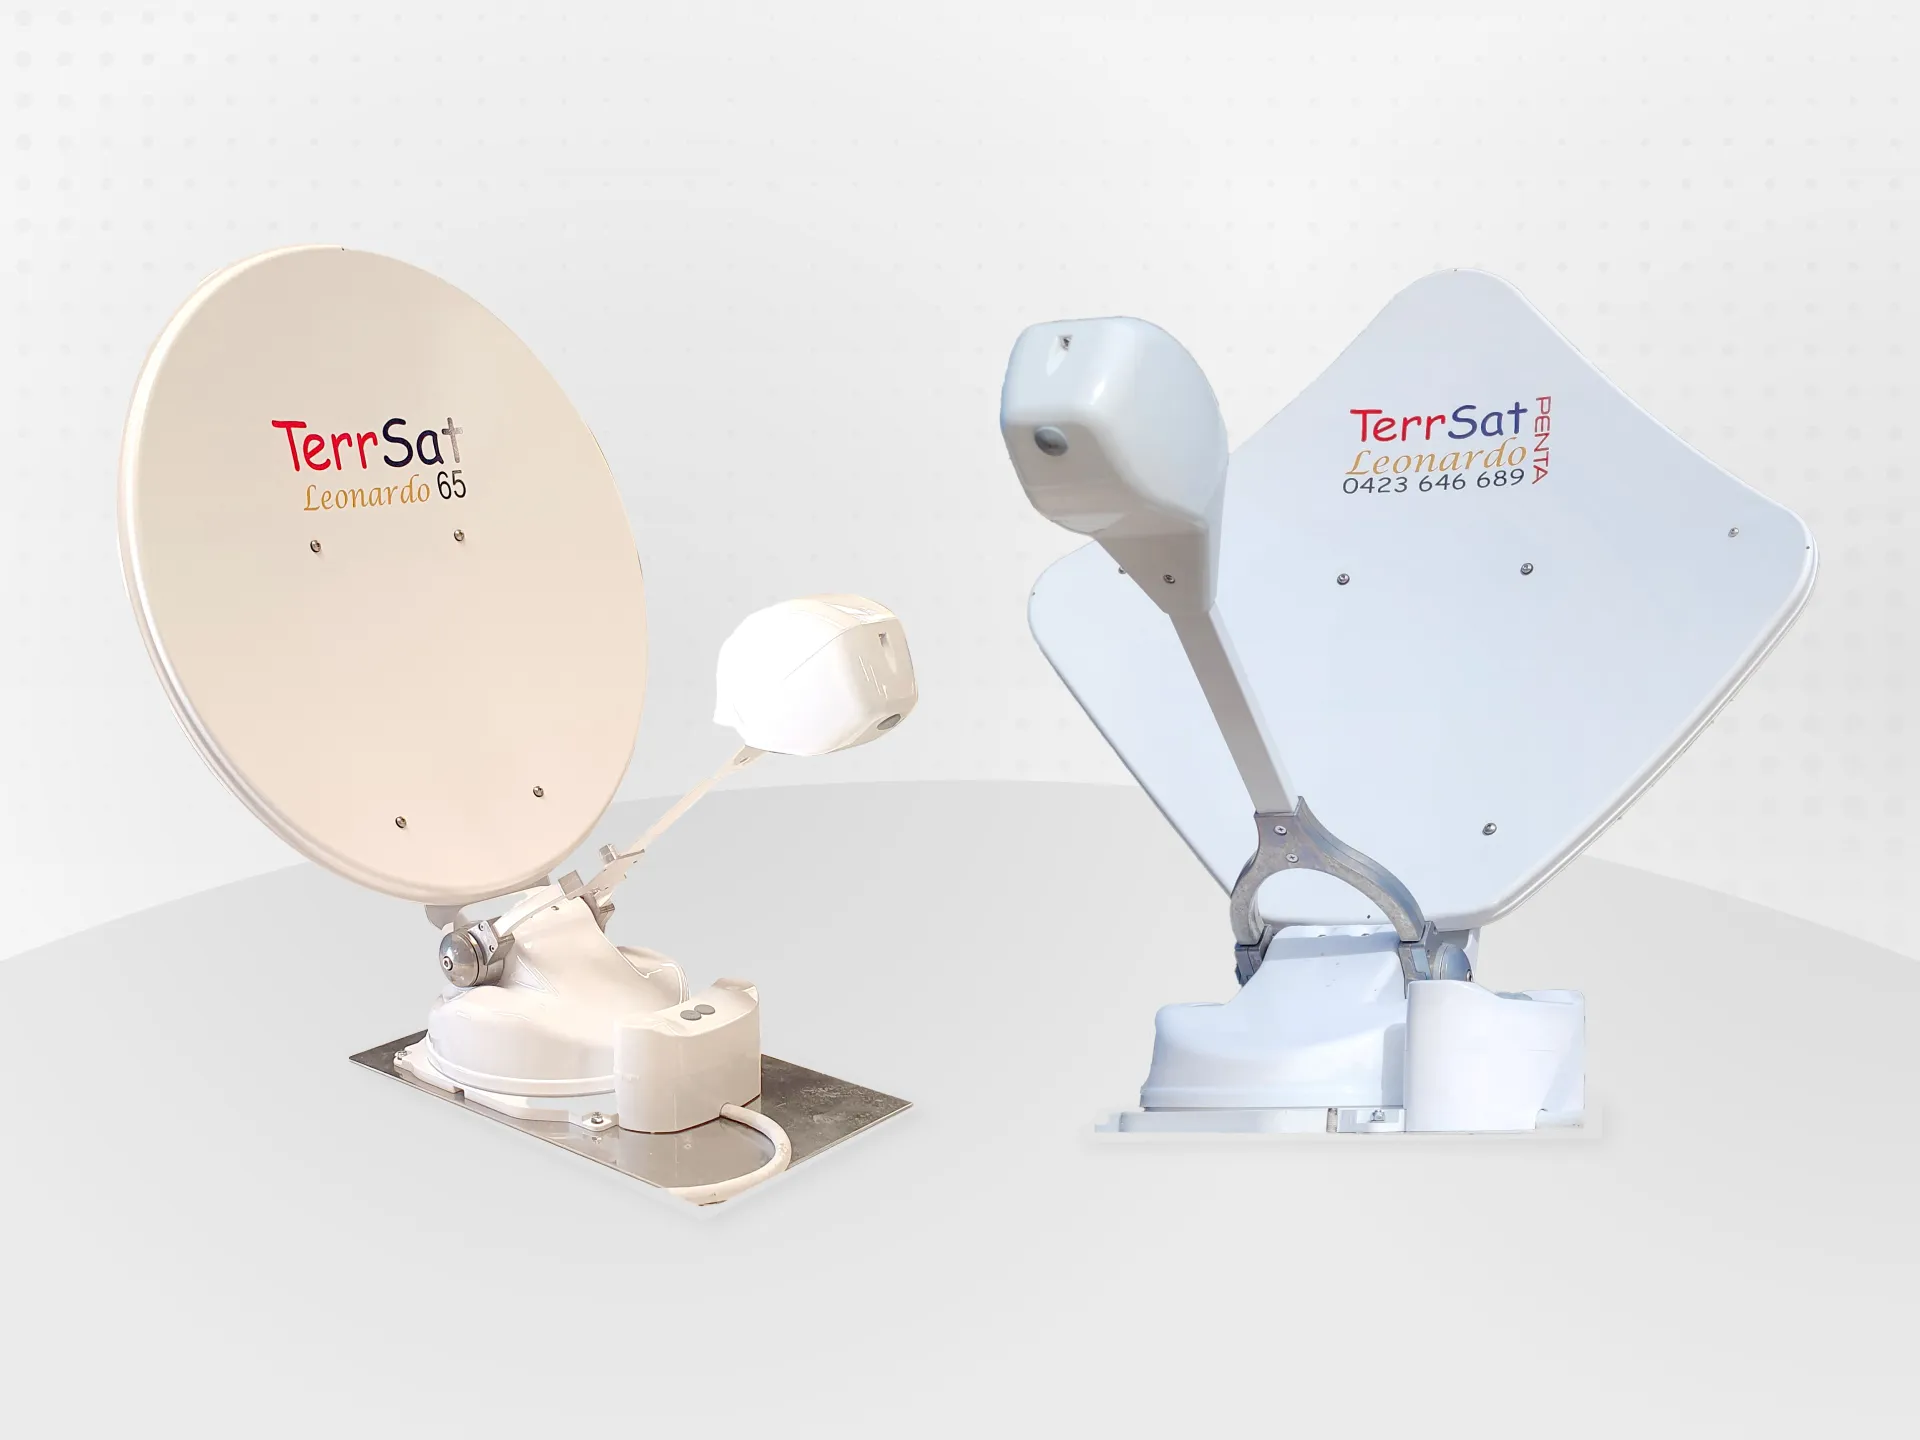 A mocked up graphic of 2 TerrSat antennas.